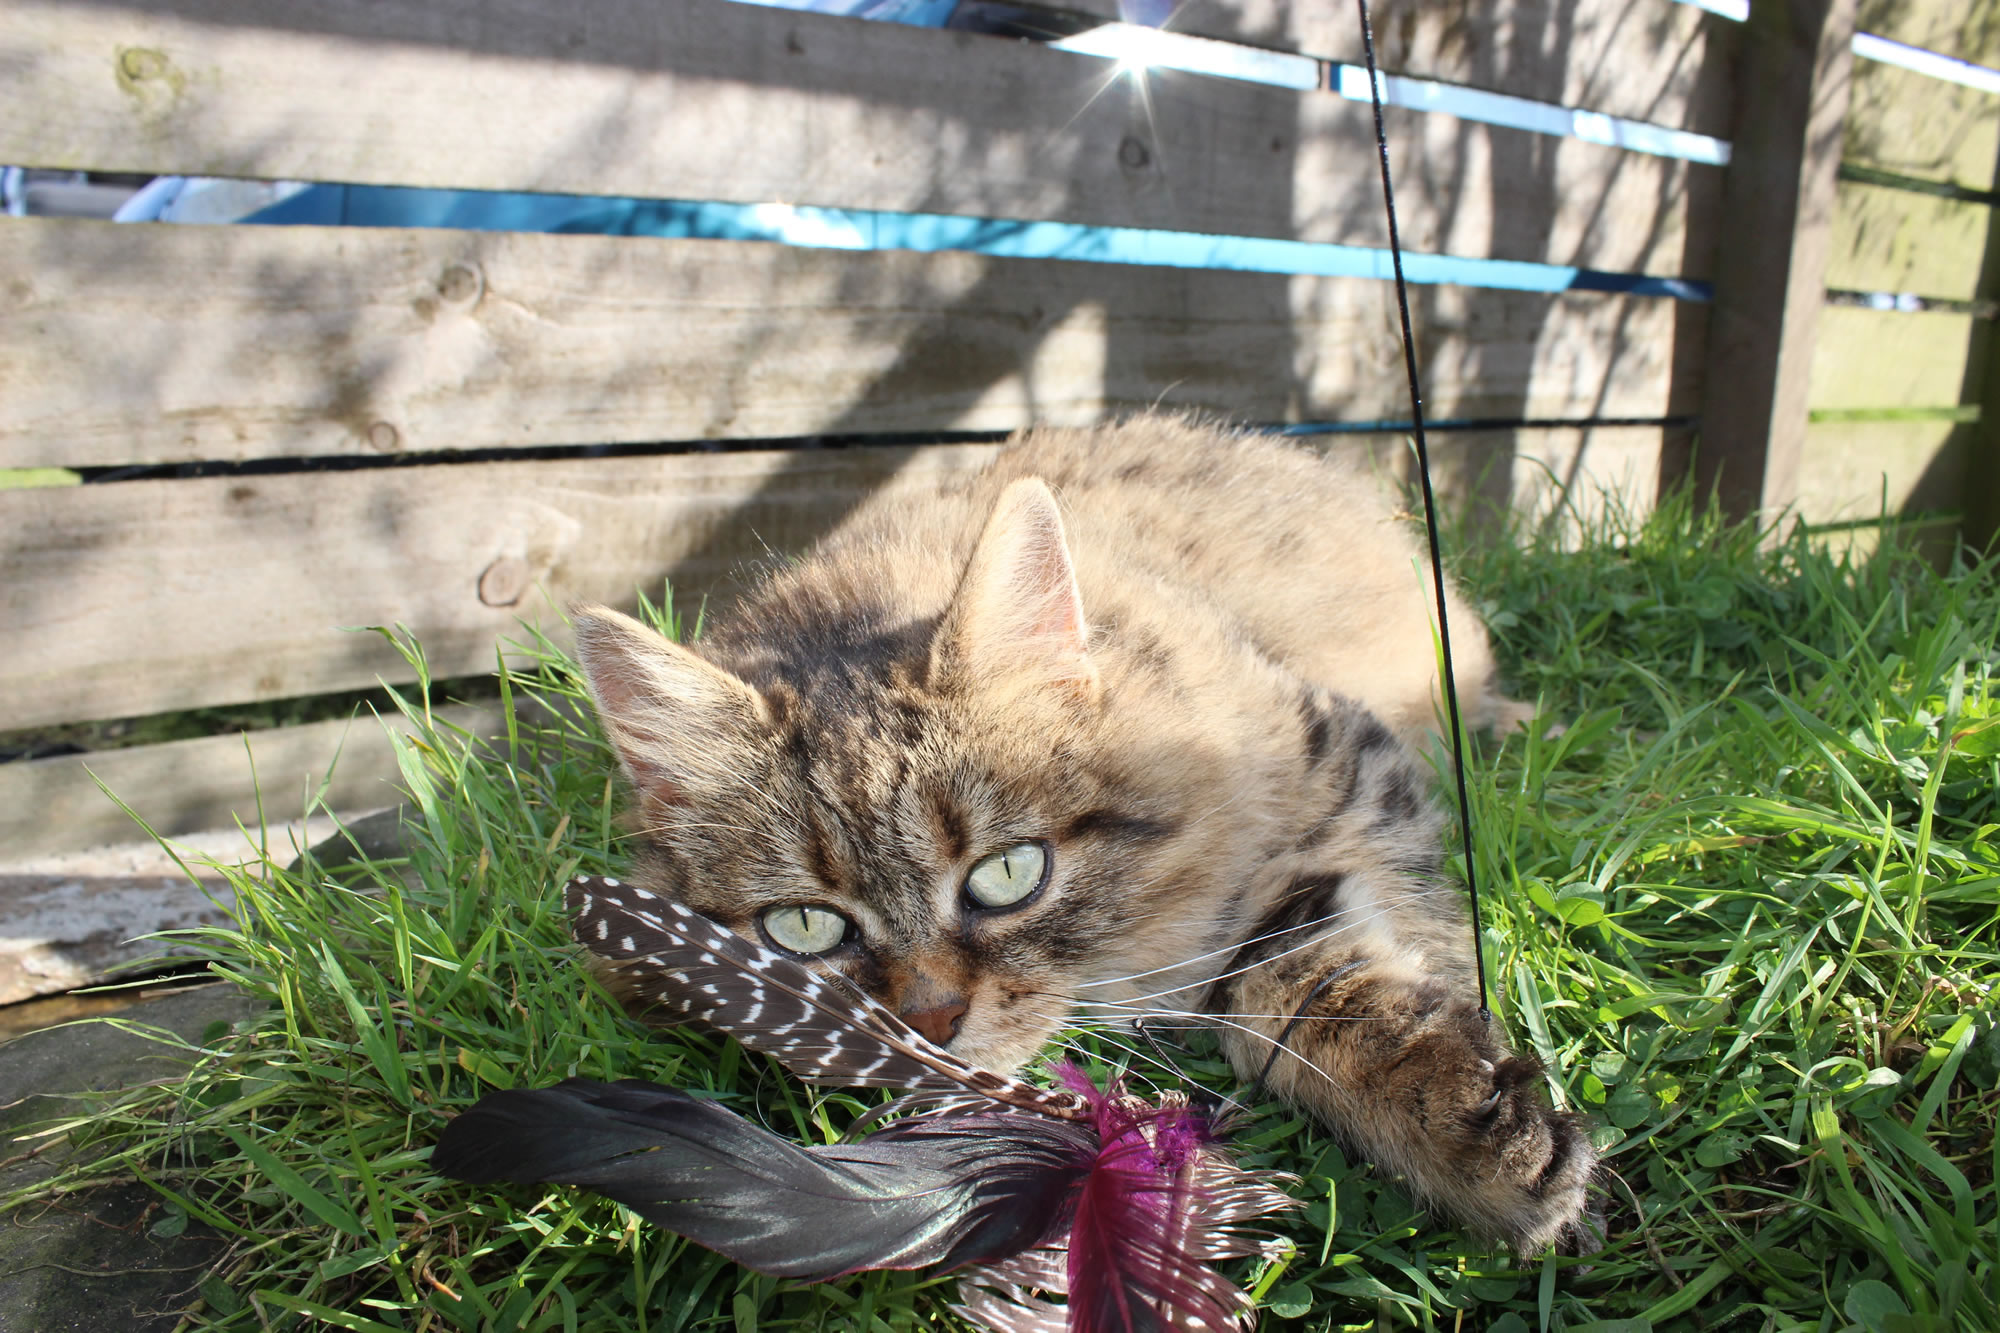 Cats - Cat Picture 25 - Our cat playing with a cat feather toy